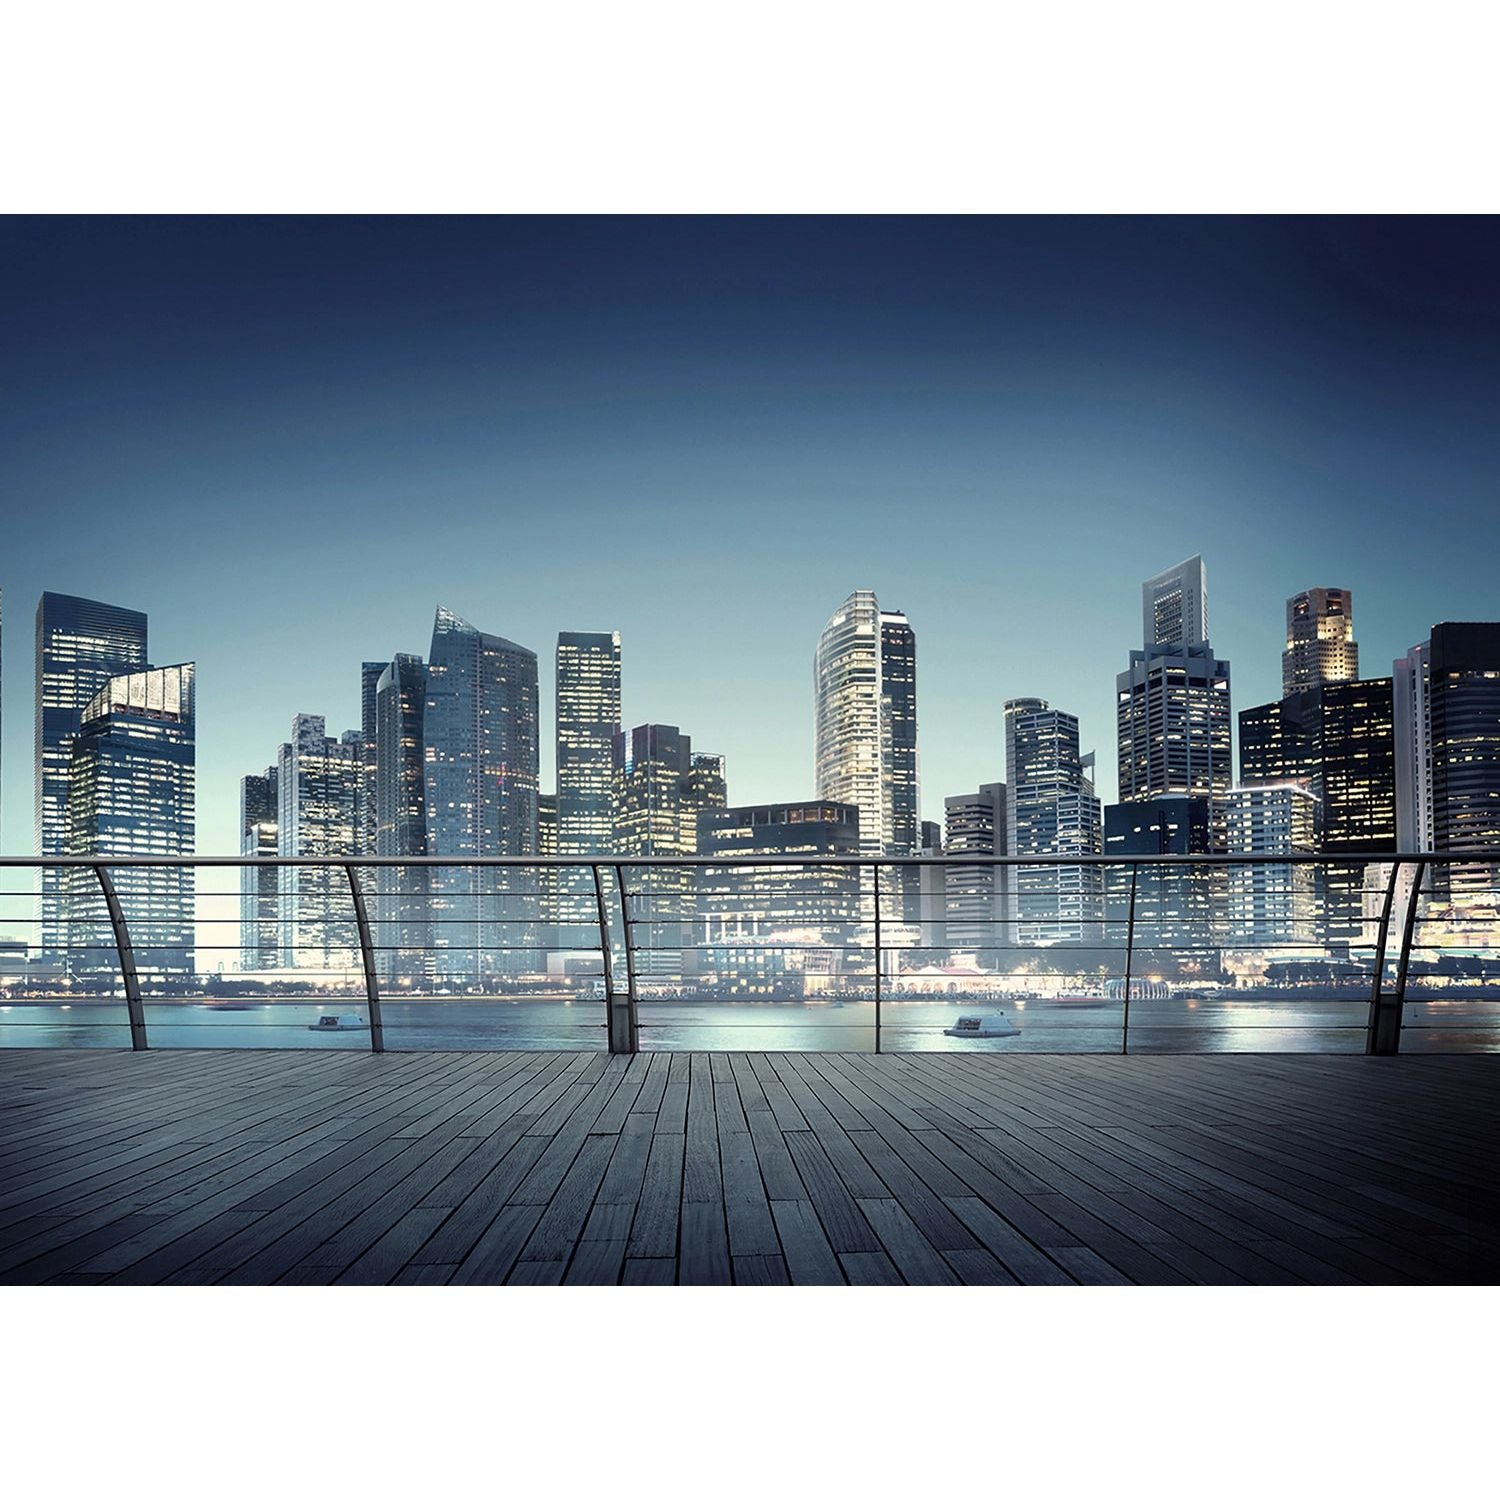 Cityscape Serenity: Waterfront Skyline at Dusk Wall Mural